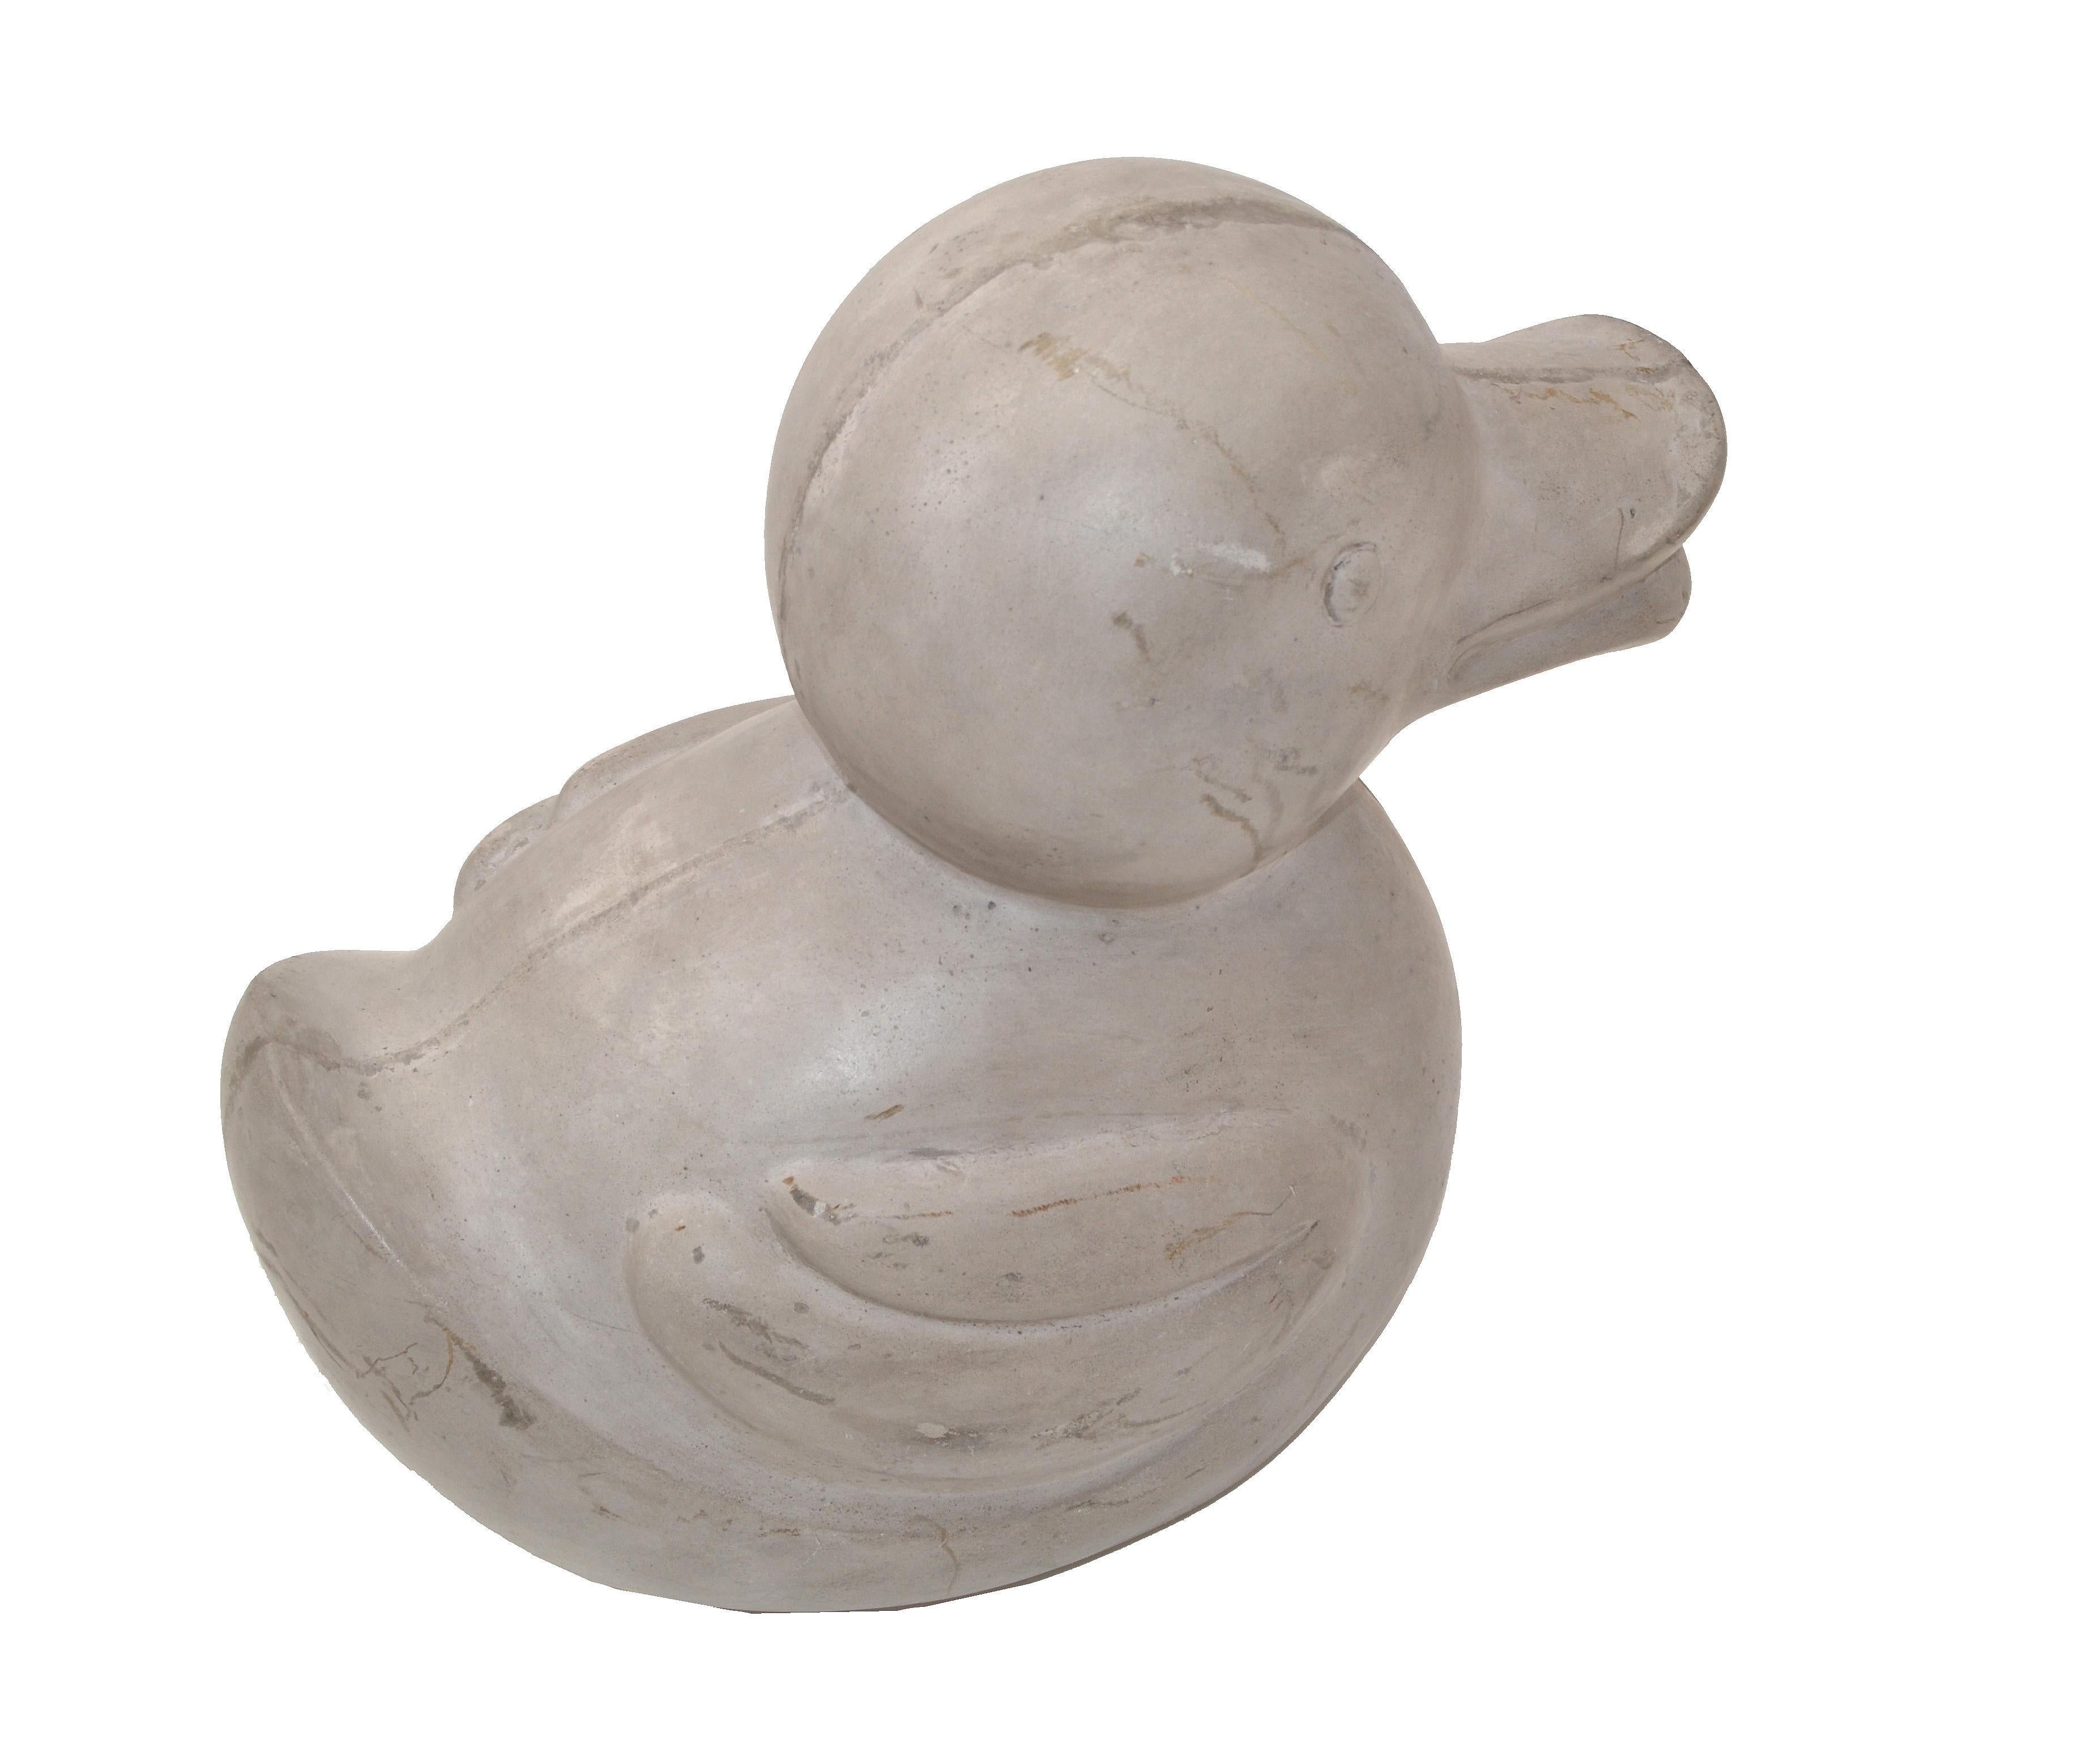 Molded Distressed Look Decorative Handcrafted Cement Mold Duck, Animal Sculpture